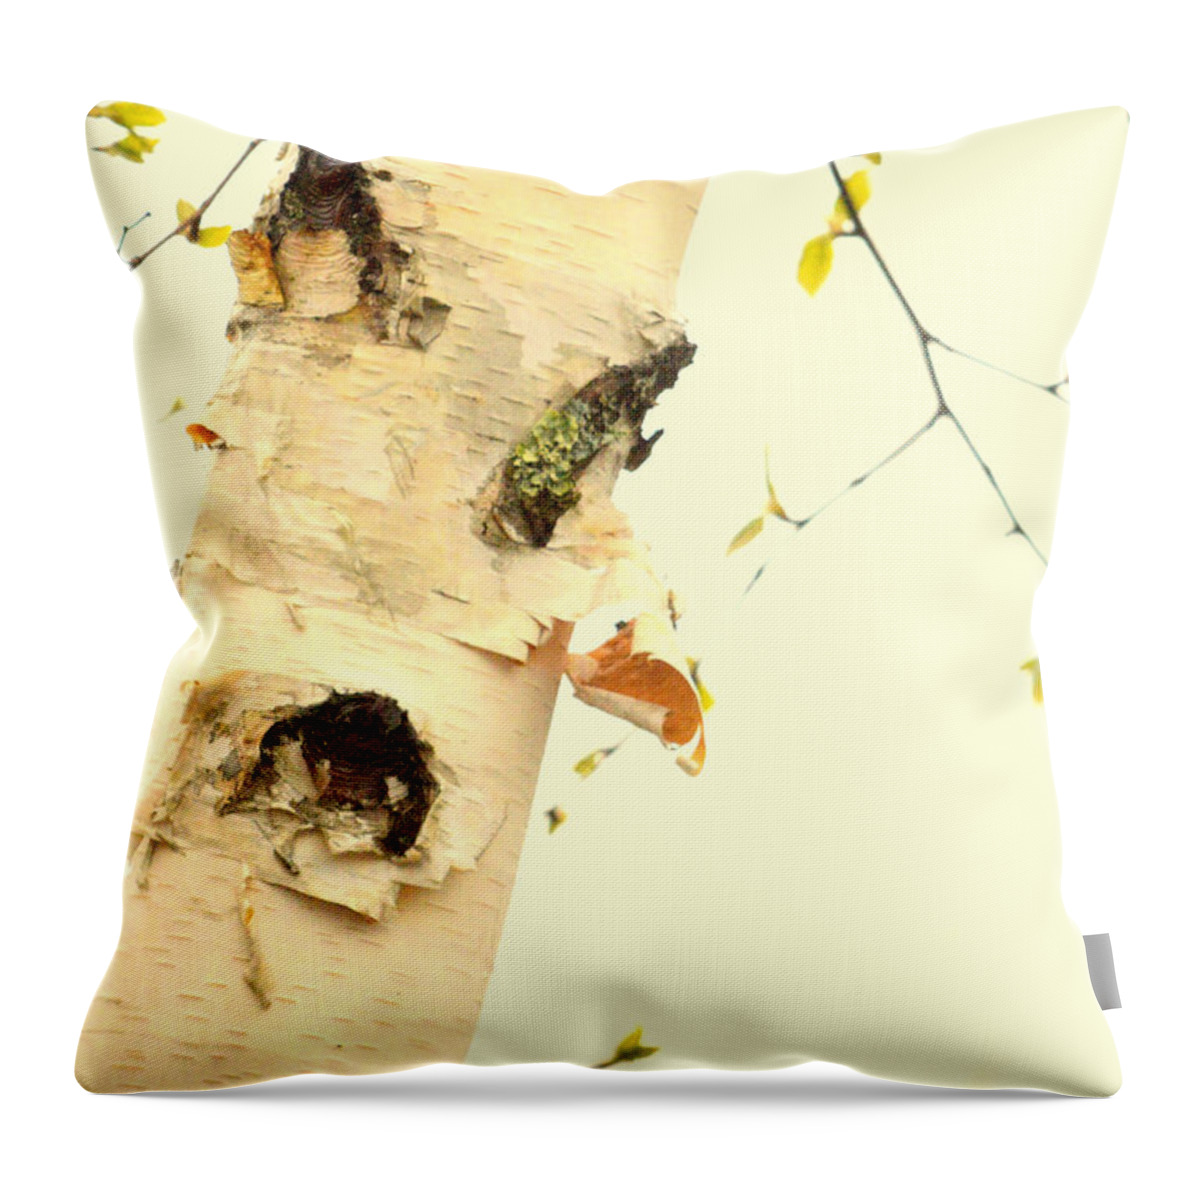  Throw Pillow featuring the photograph Changes by Al Swasey